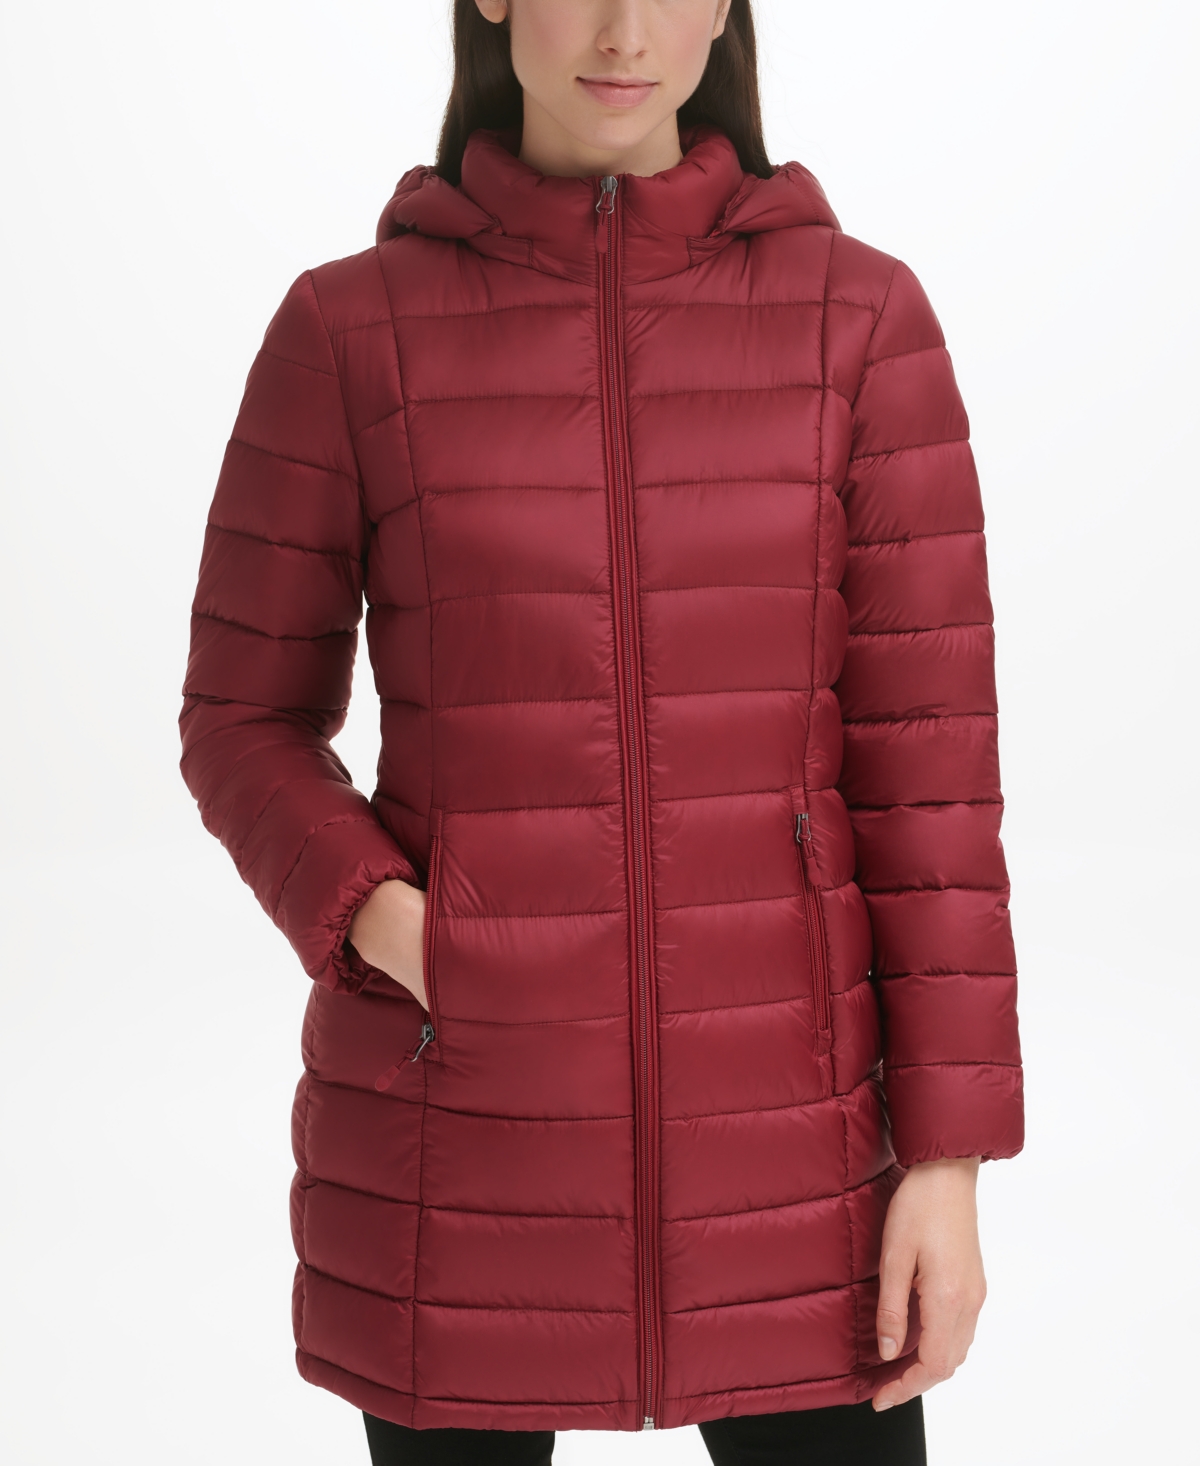 Charter Club Women's Packable Hooded Down Puffer Coat, Created for Macy's